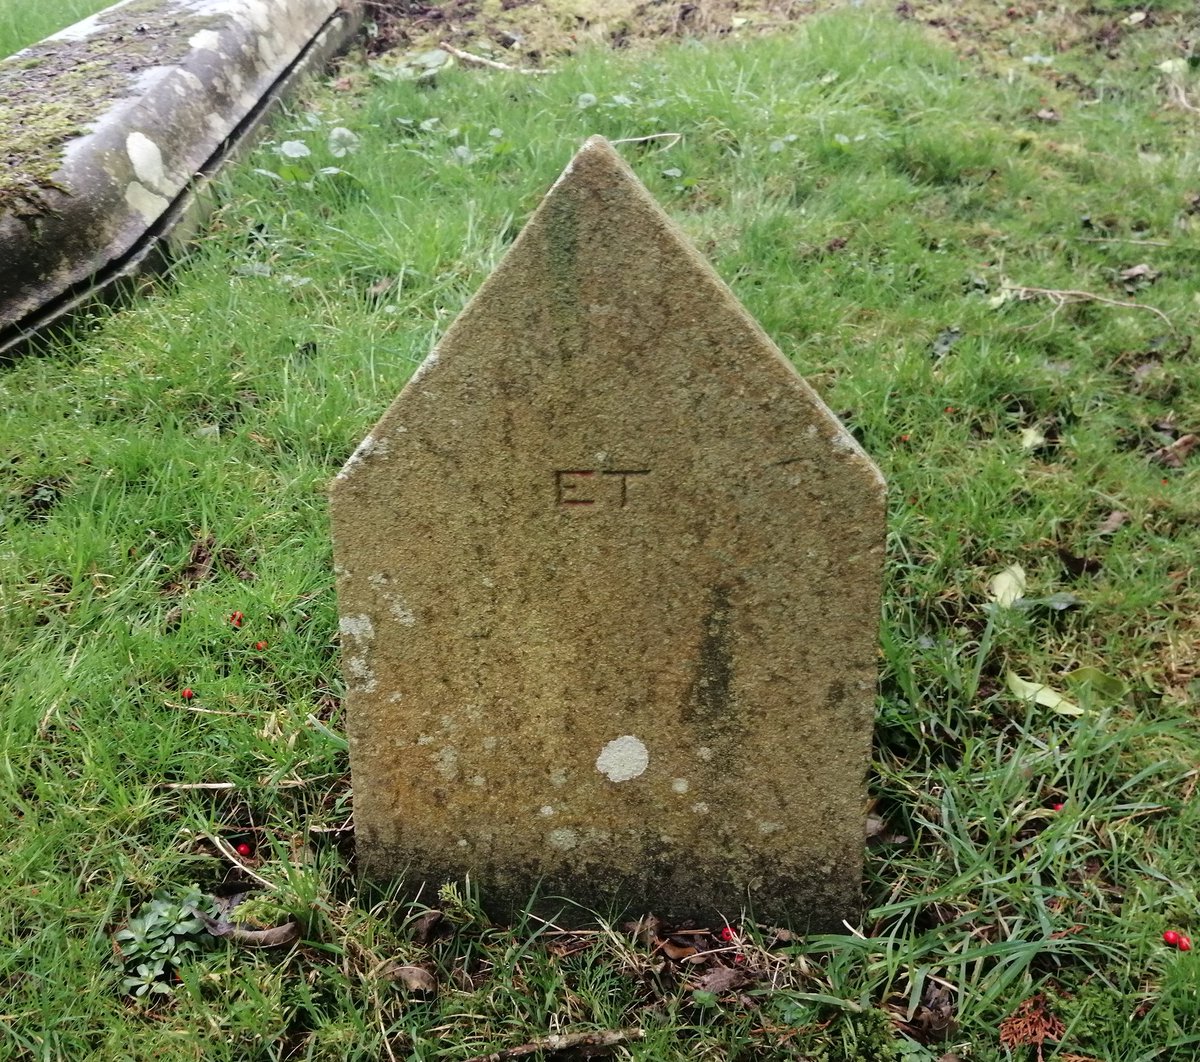 An example of a pauper/low-income gravemarker at St Mary's Church, Coity.  #Wales  #History